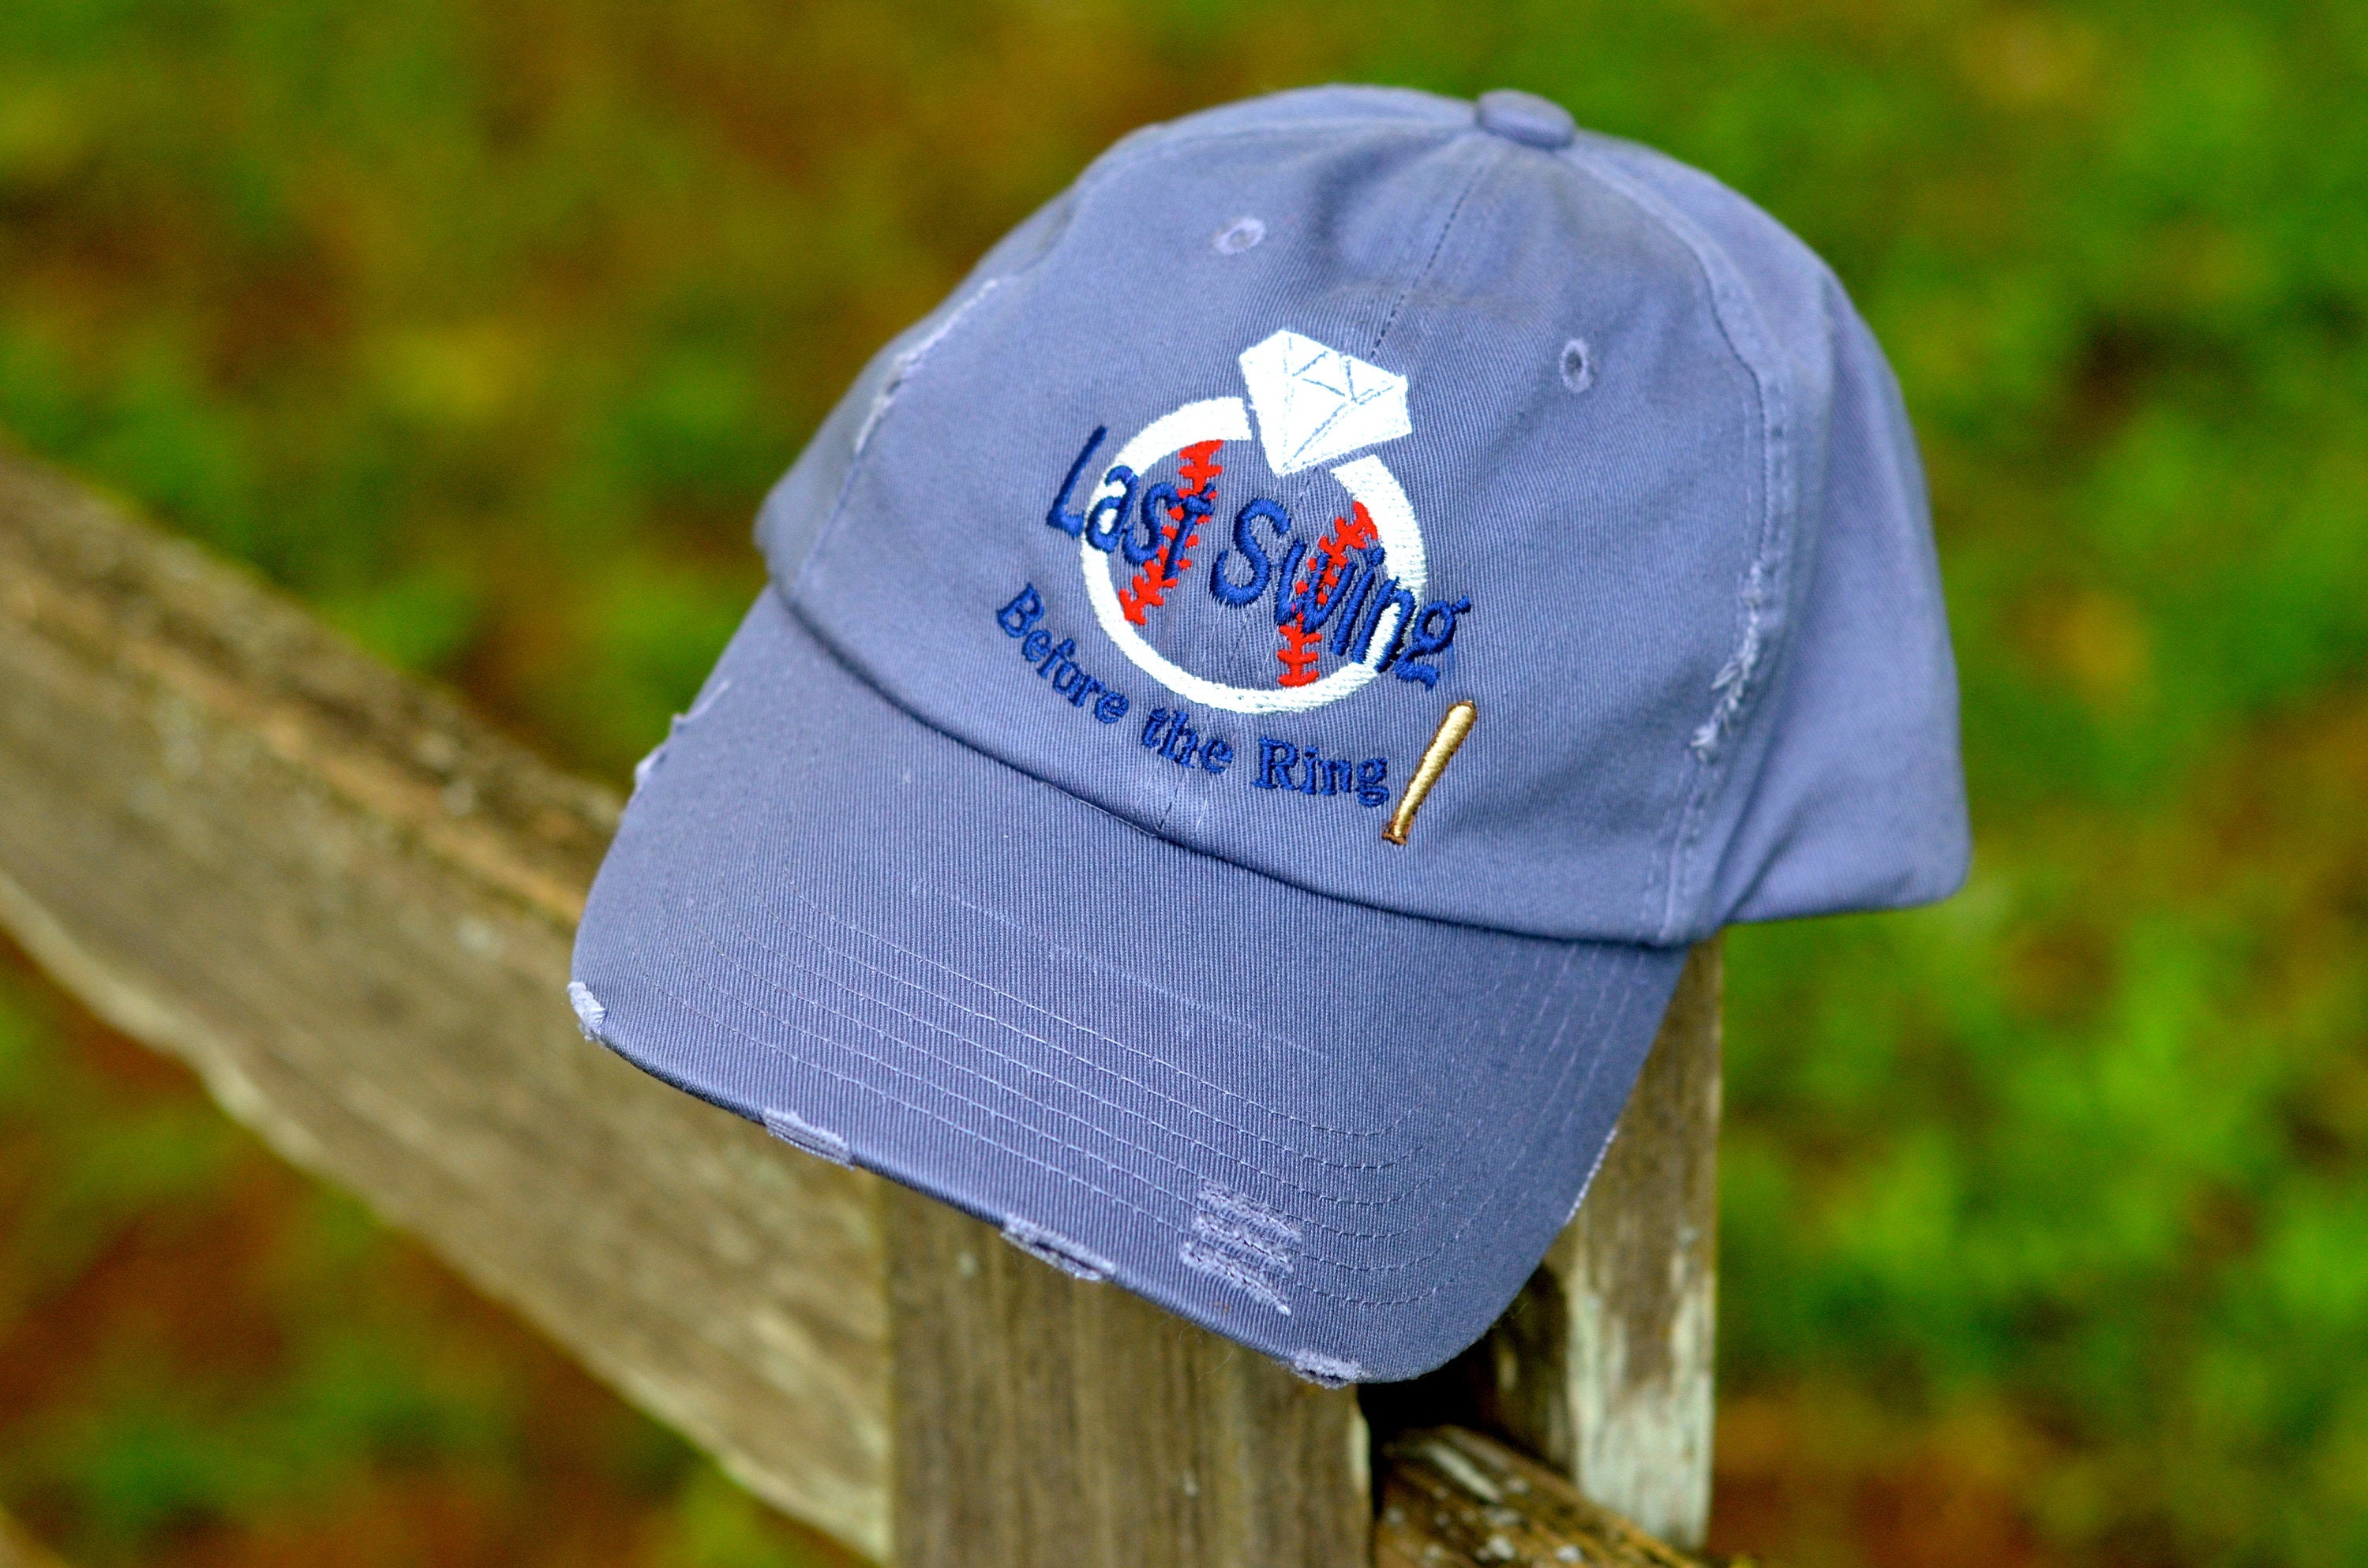 Blue Last Swing Before the Ring // Bachelorette Party Bride Trucker Mesh Unstructured Hat // Red, White and Blue Baseball